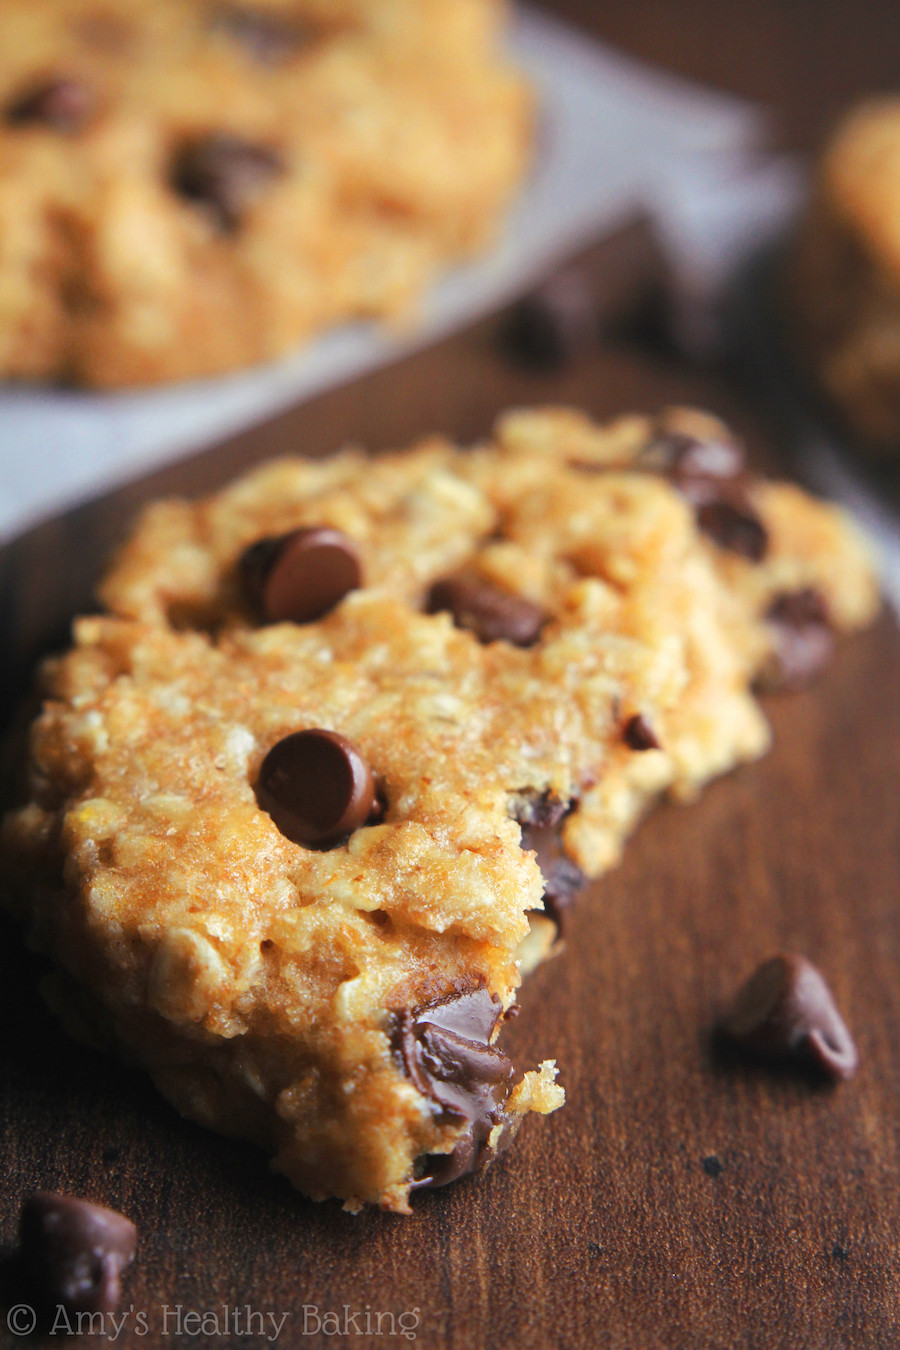 Healthy Oatmeal Peanut Butter Chocolate Chip Cookies
 Chocolate Chip Peanut Butter Oatmeal Cookies Recipe Video